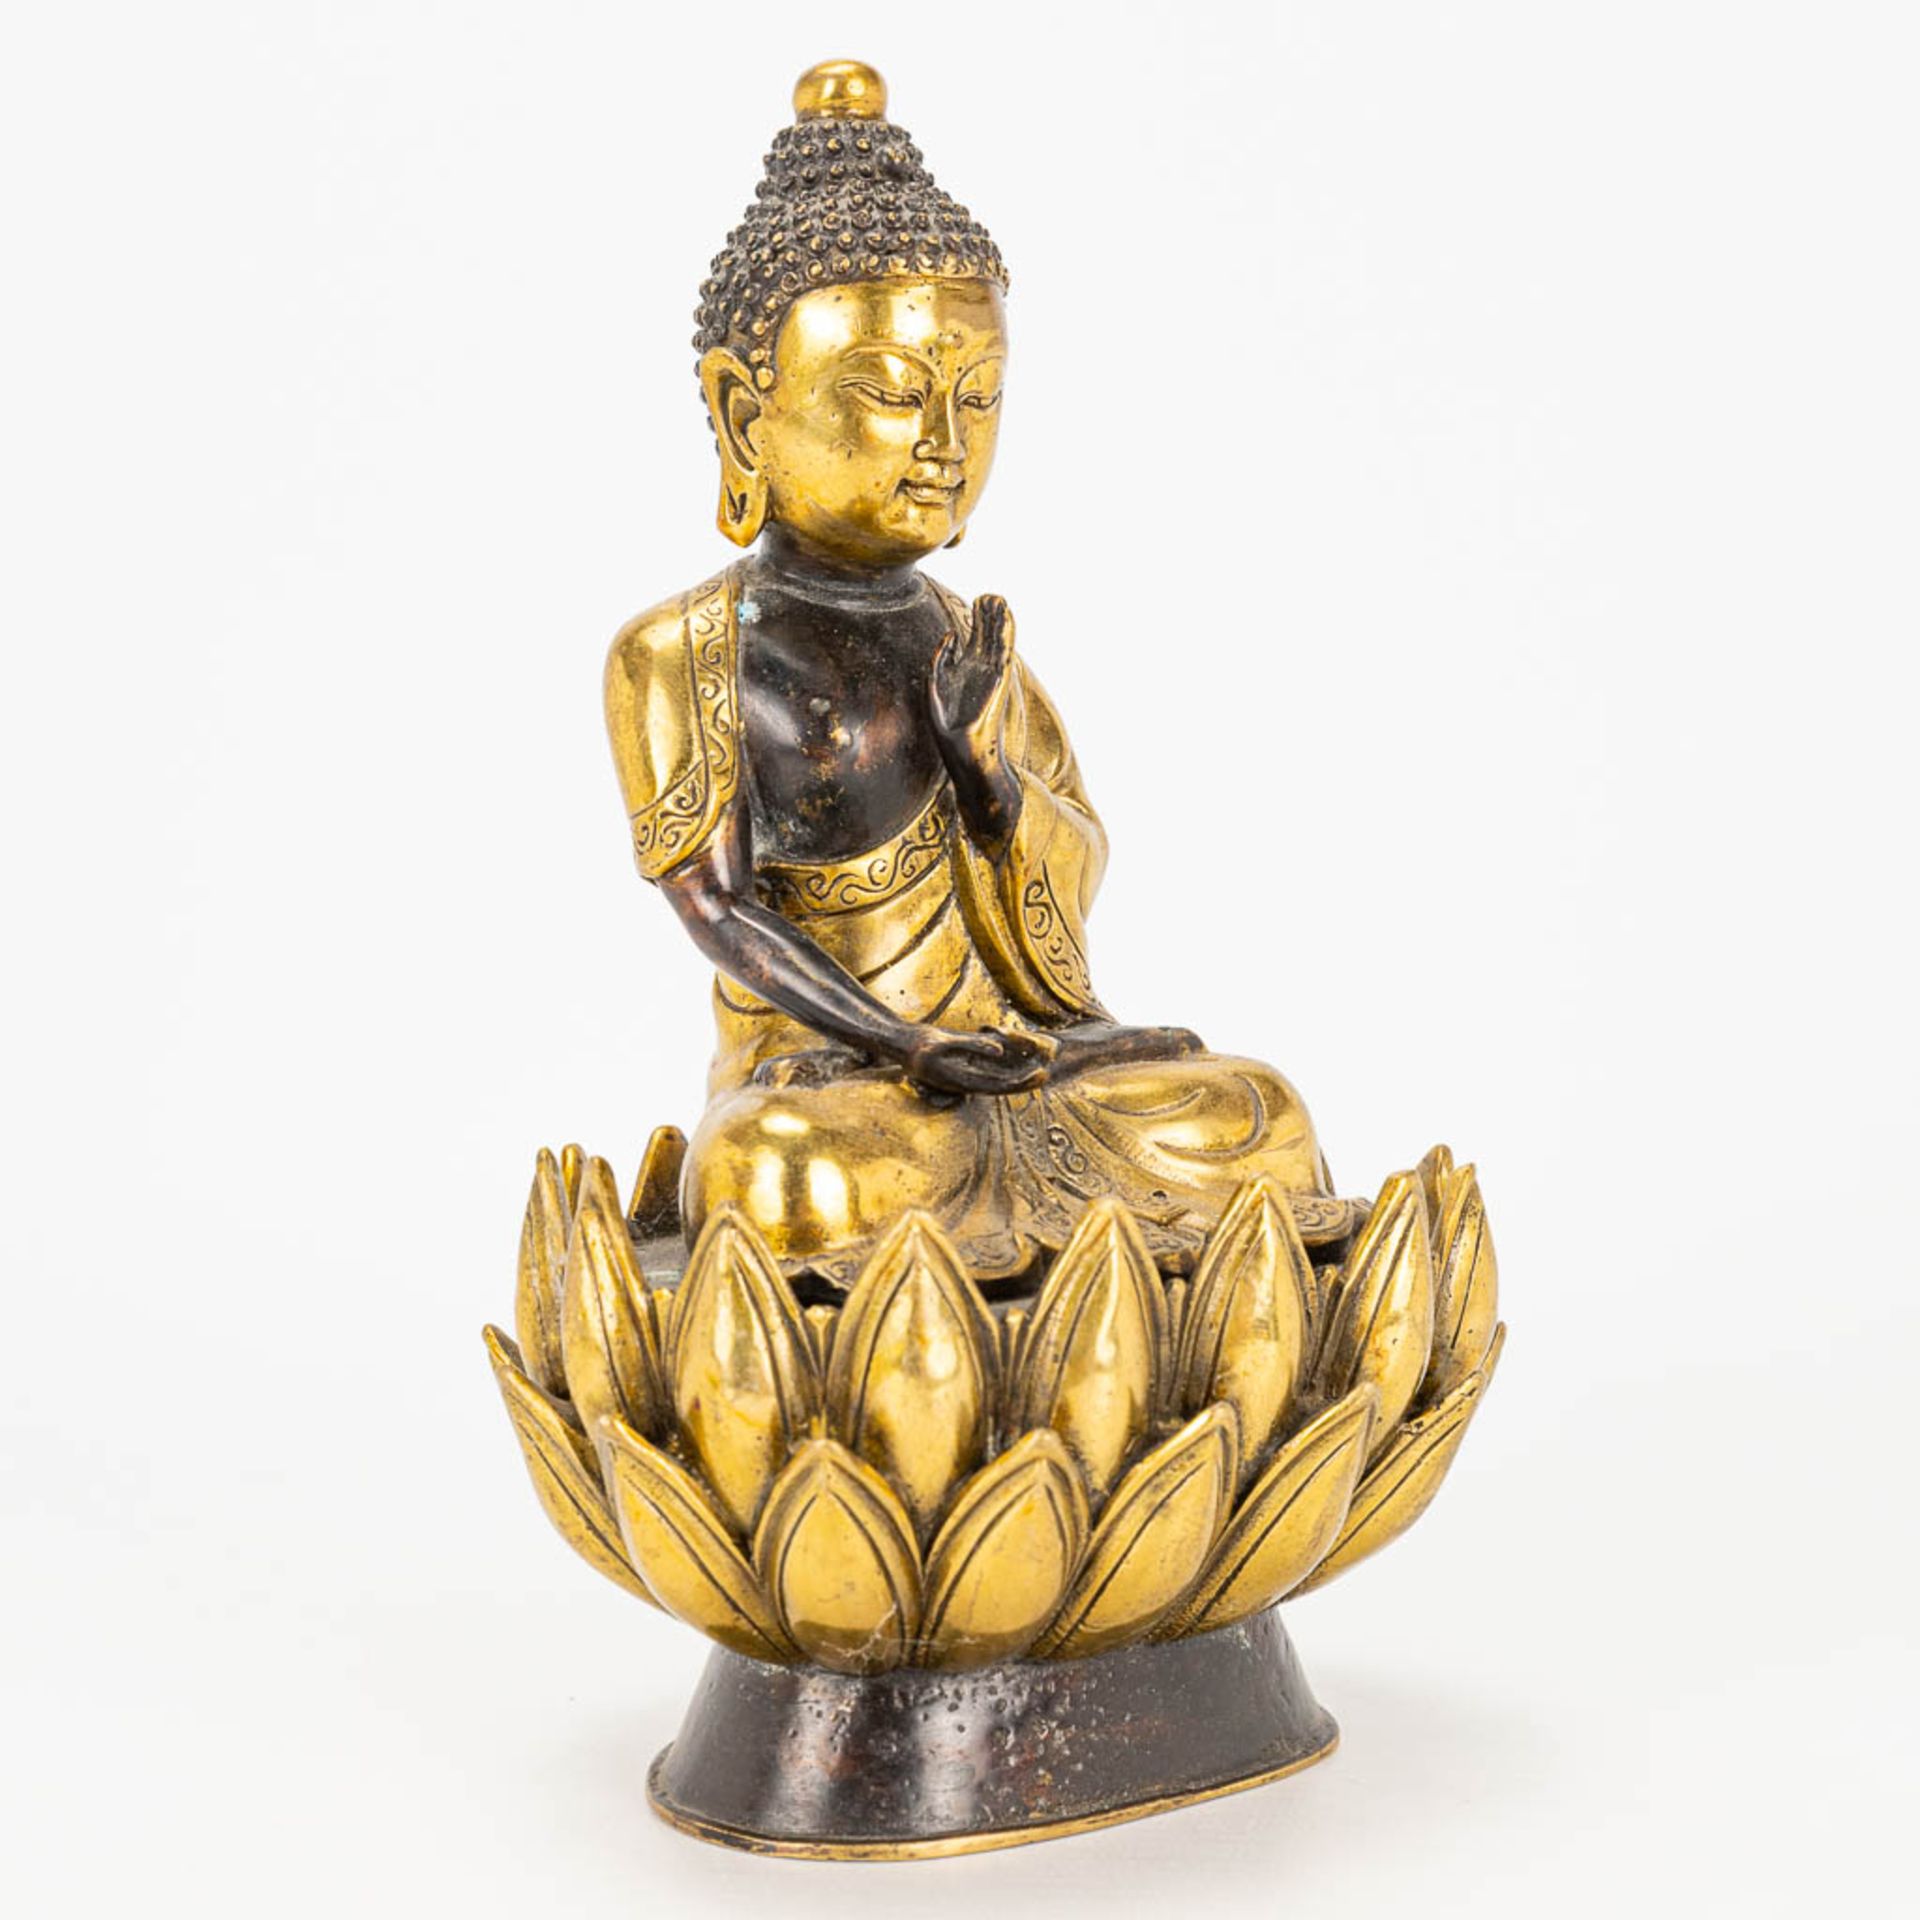 A Buddha on a lotus flower made of bronze. - Image 5 of 11